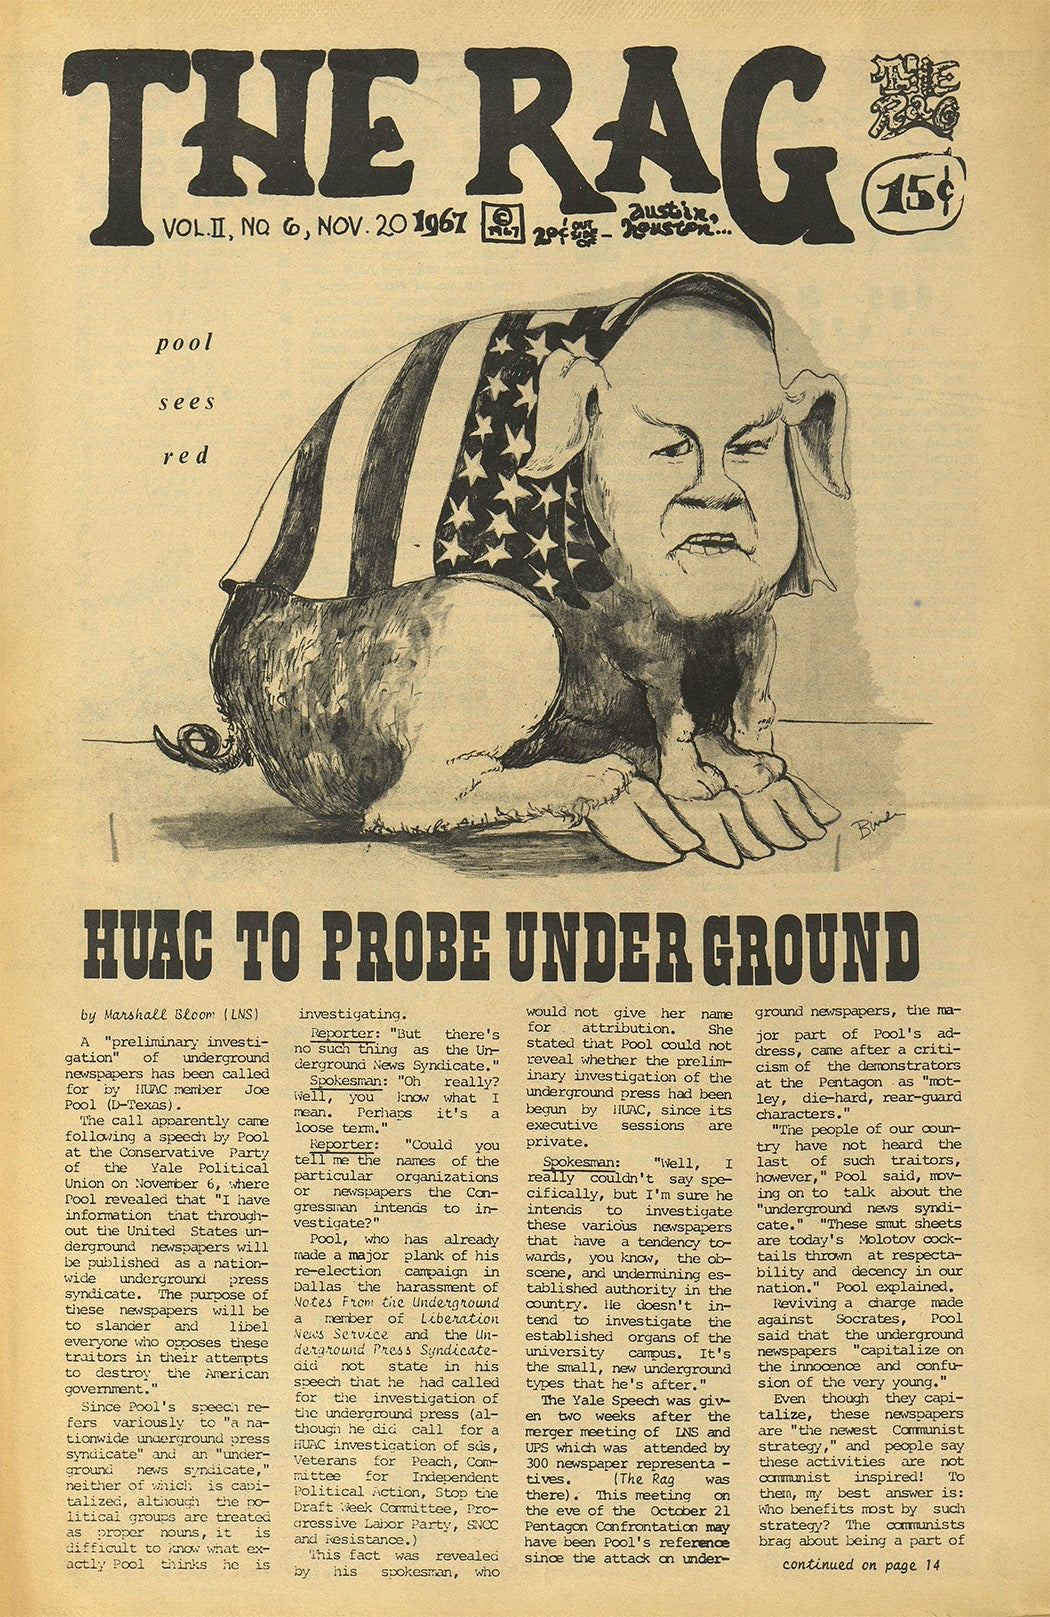 The cover of The Rag, November 20, 1967